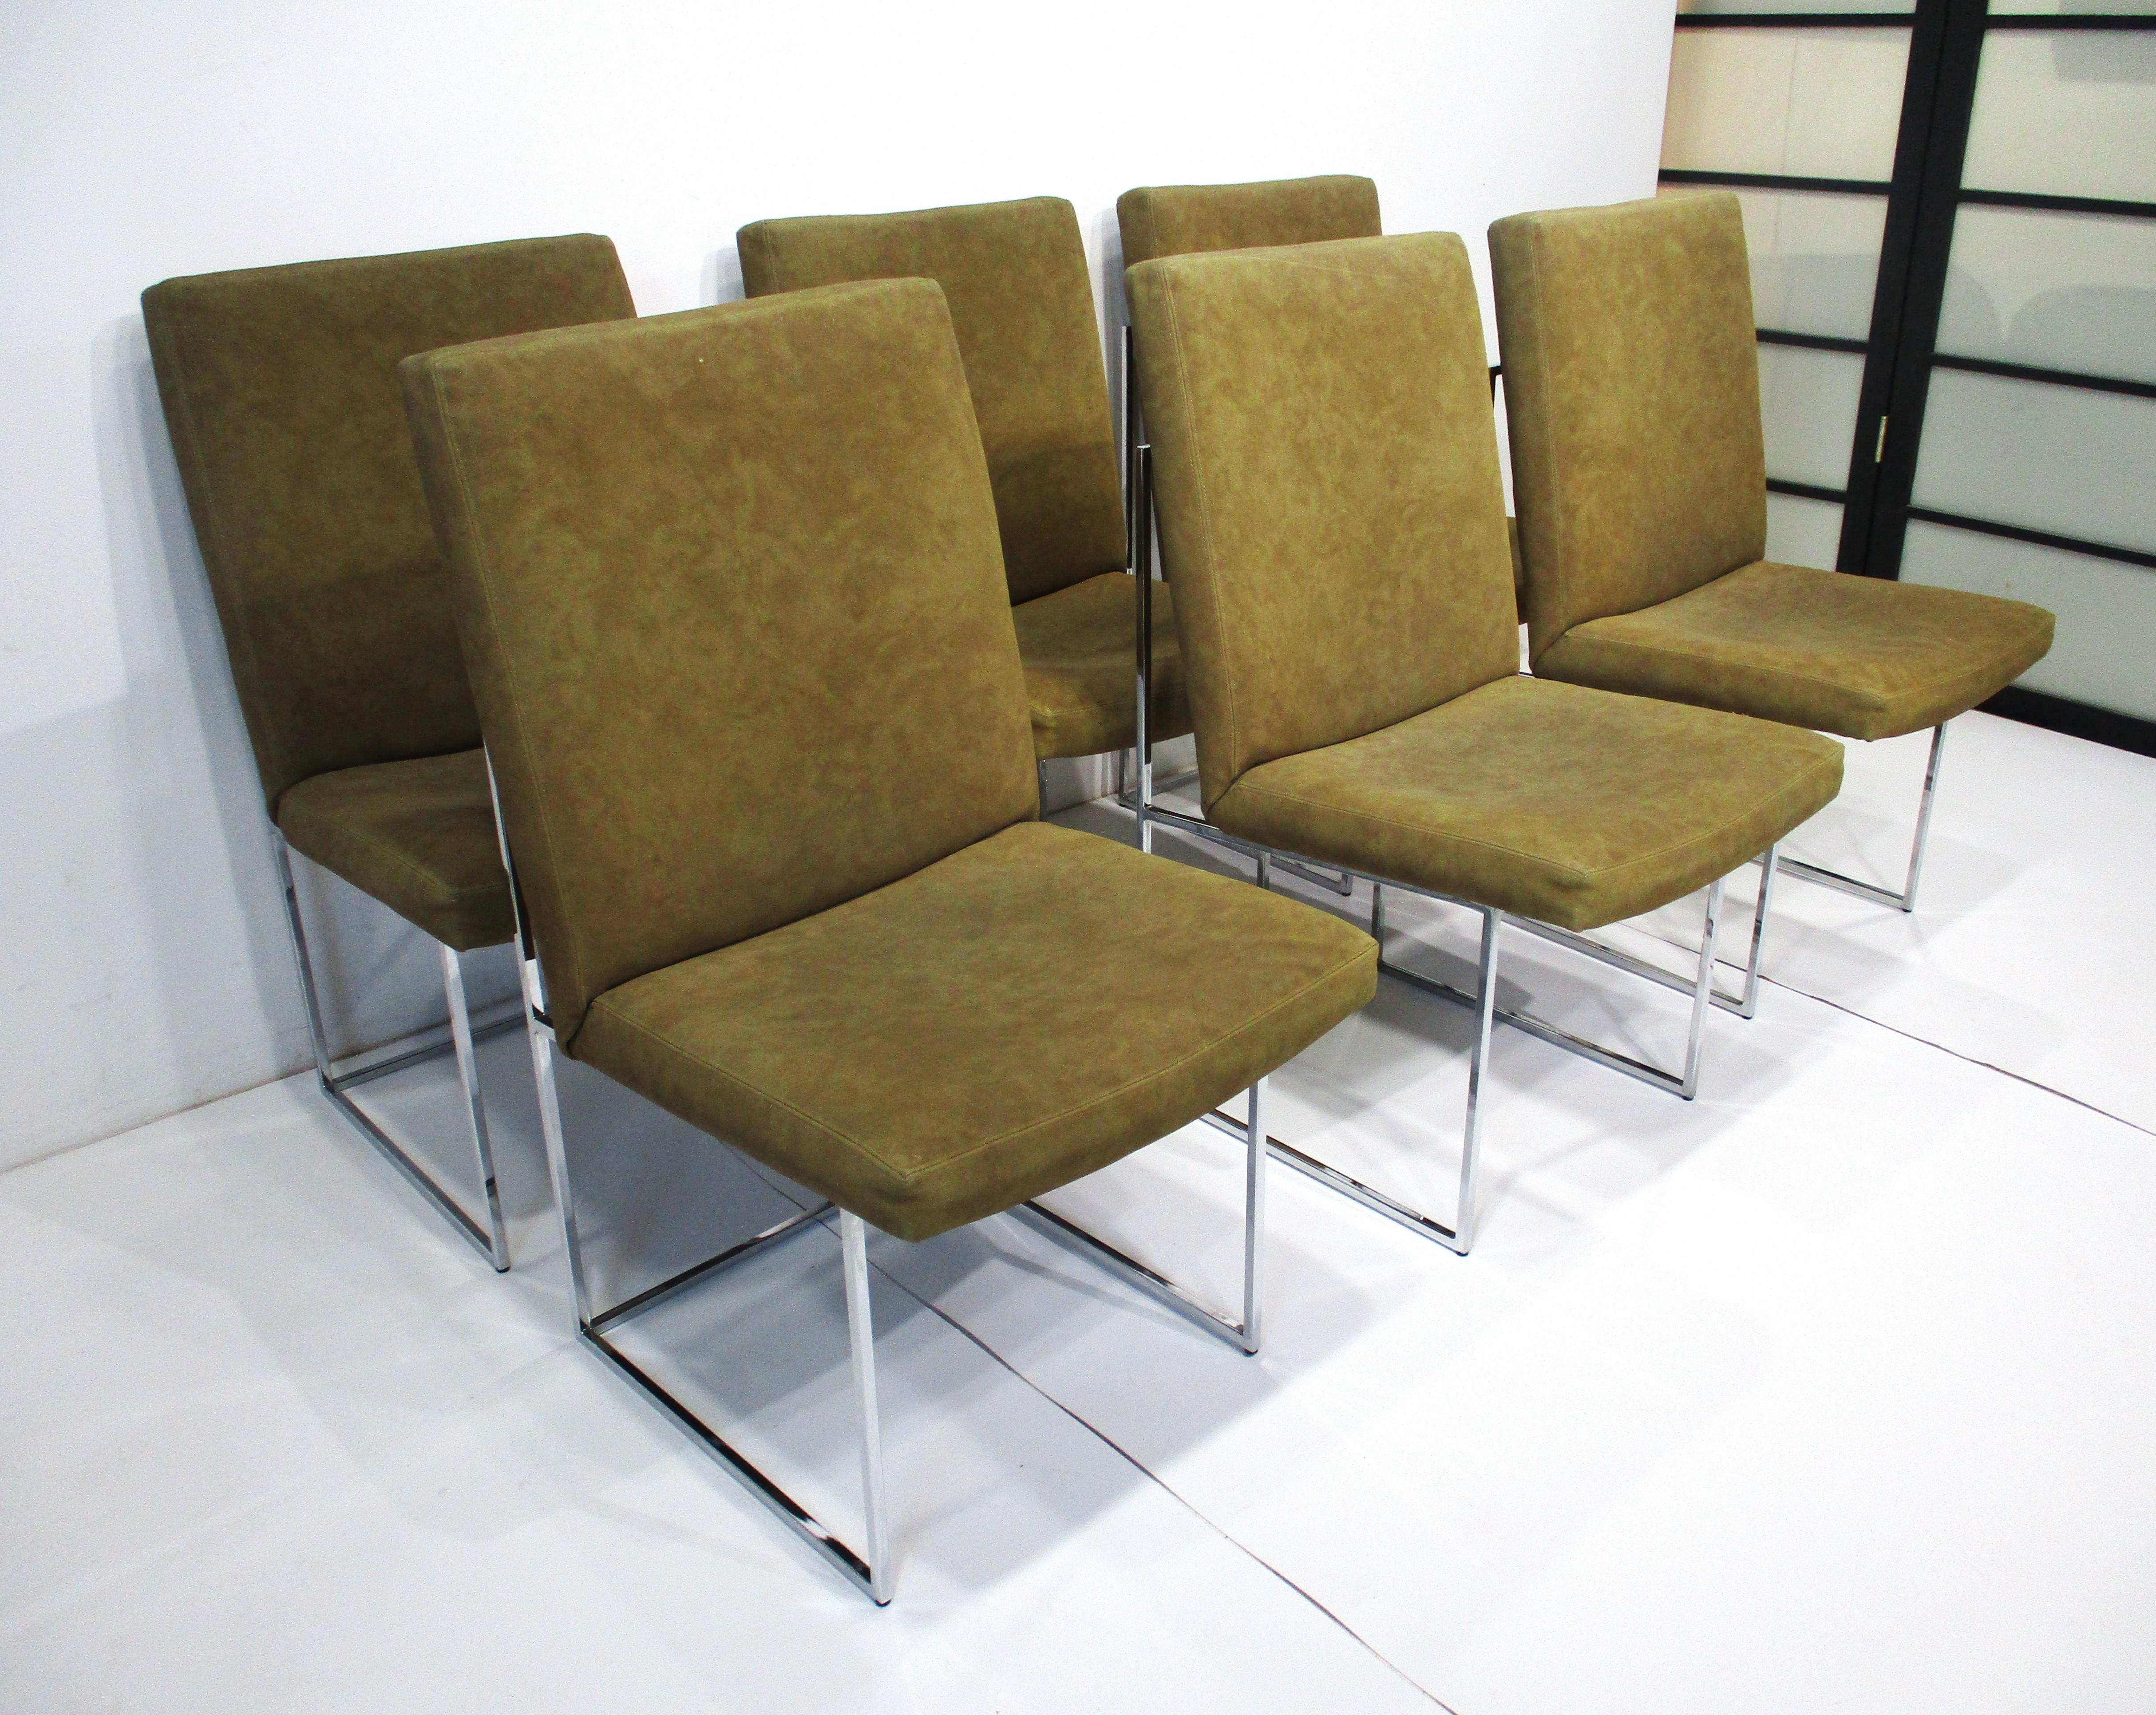 6 Milo Baughman Chrome and Suede Dining Chairs for Thayer Coggin    7